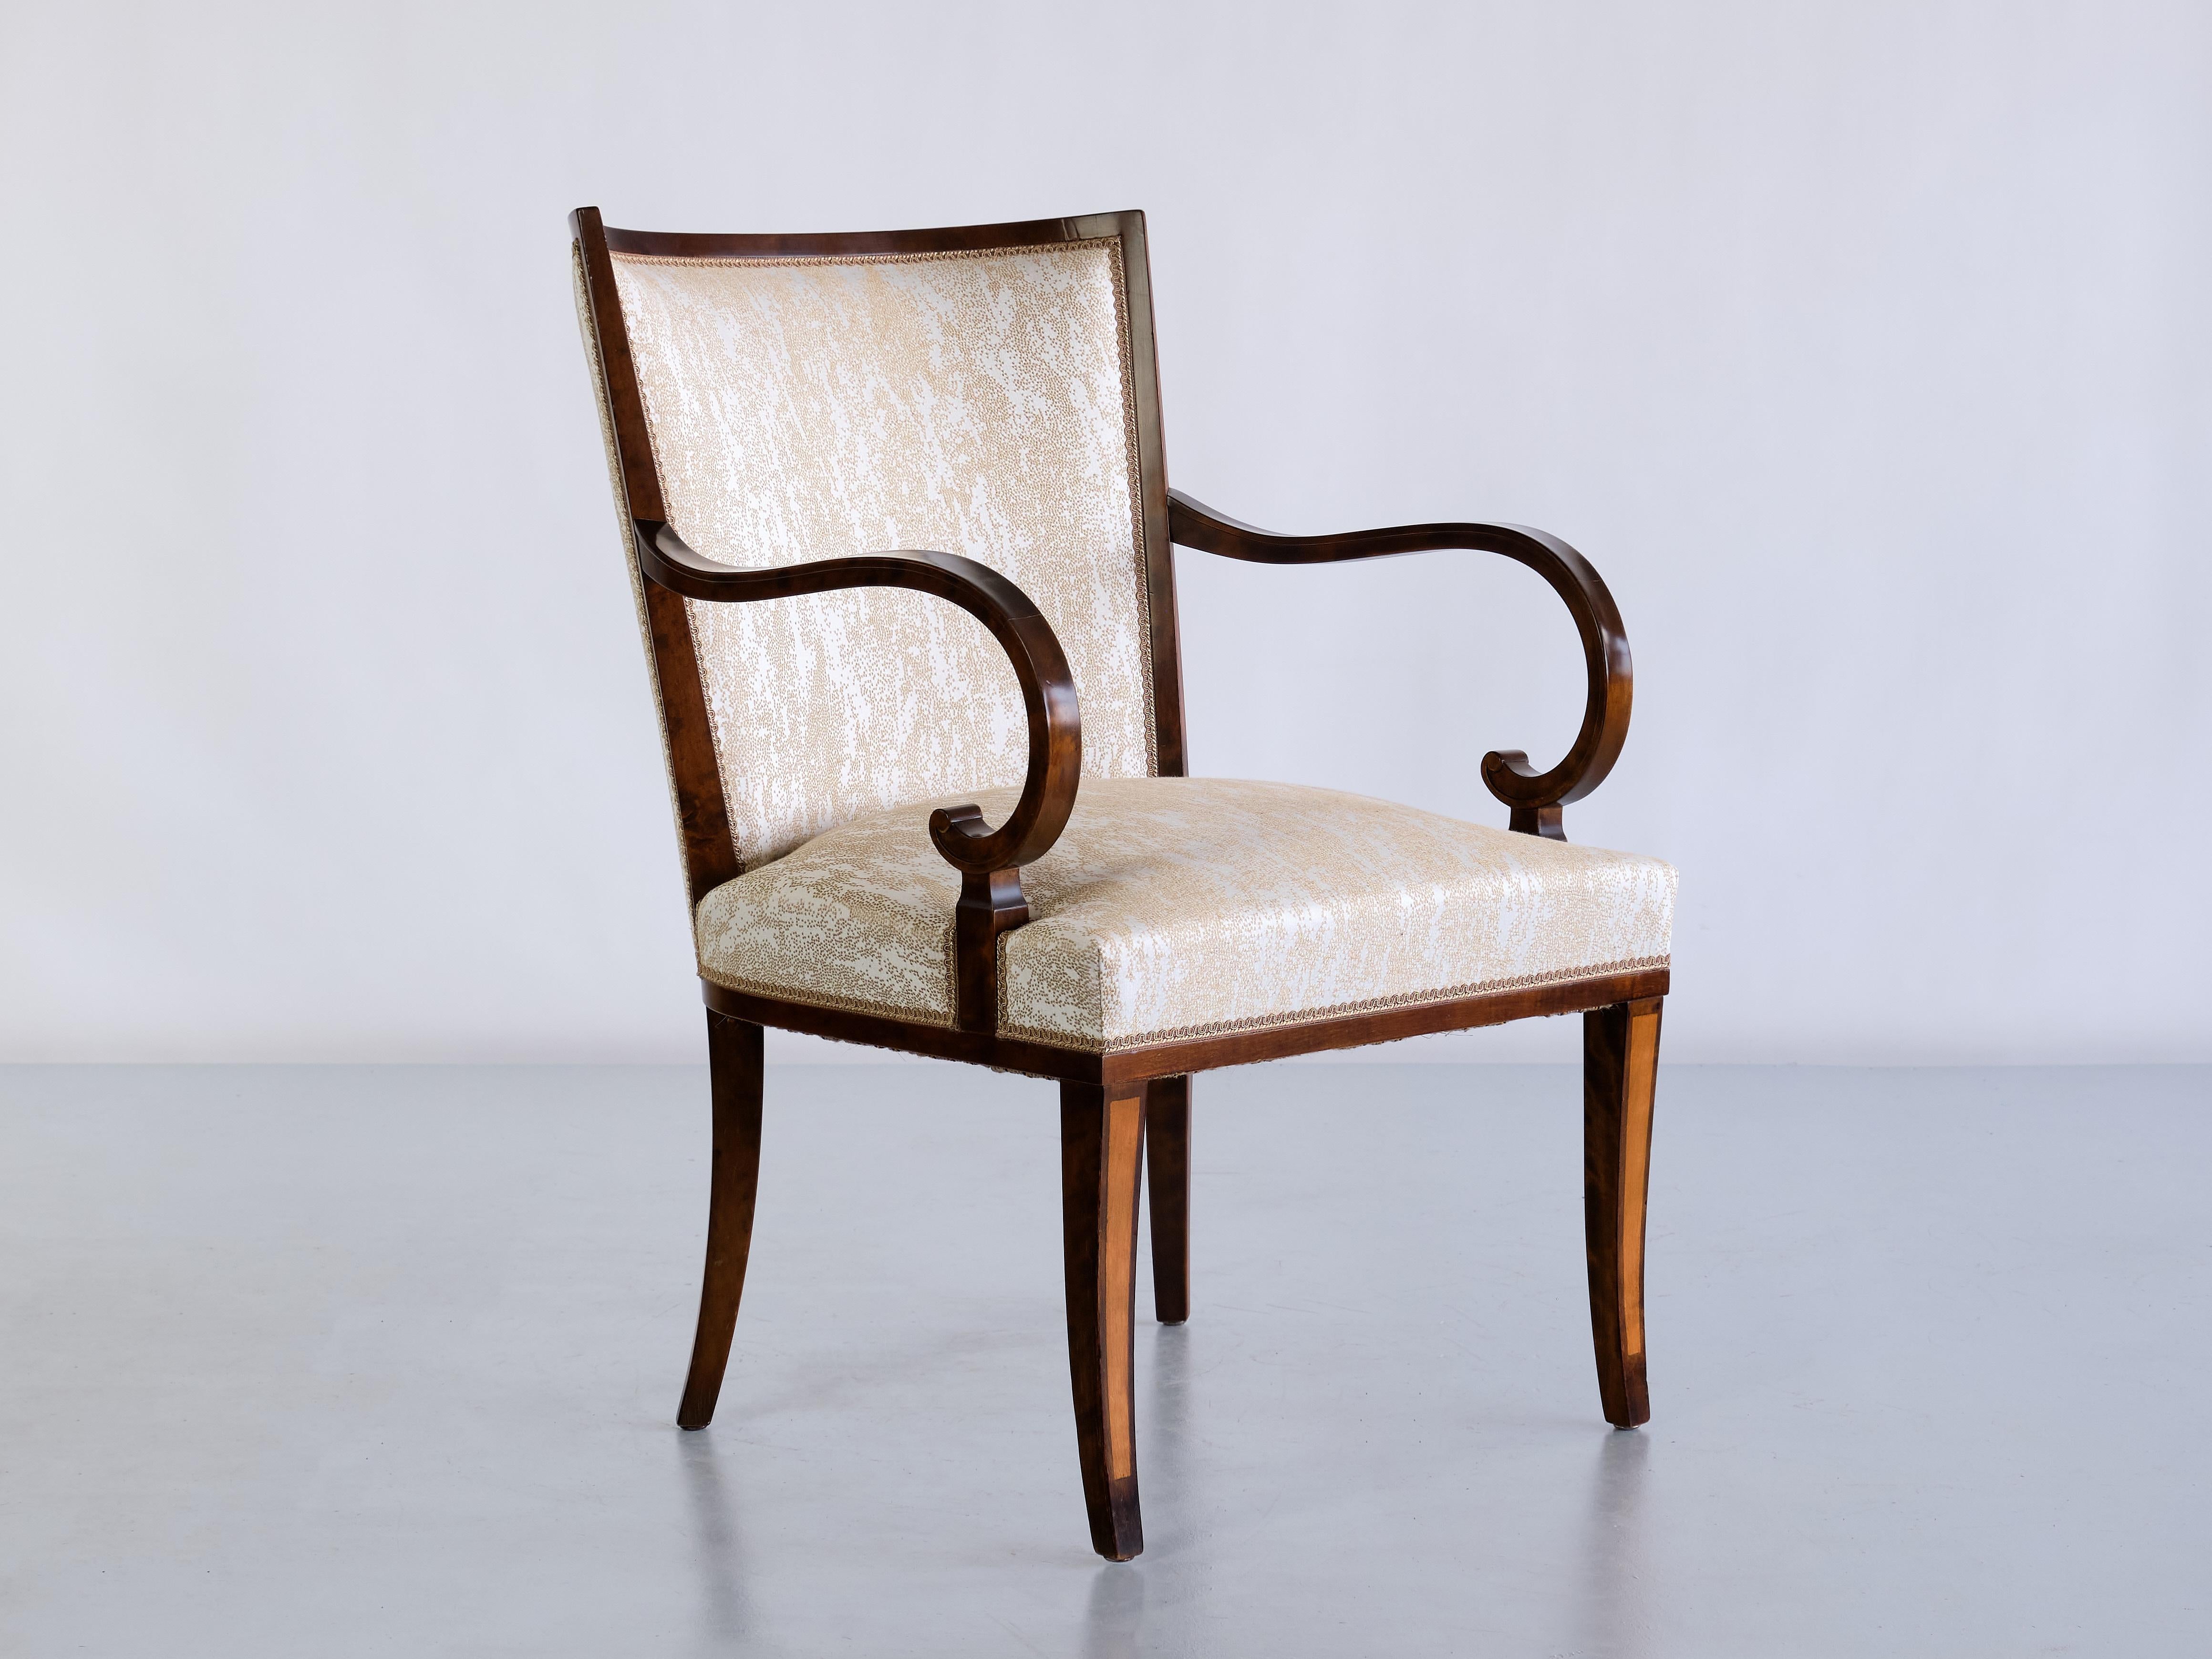 Pair of Carl Malmsten Armchairs in Birch and Satinwood, Bodafors, Sweden, 1930s In Good Condition For Sale In The Hague, NL